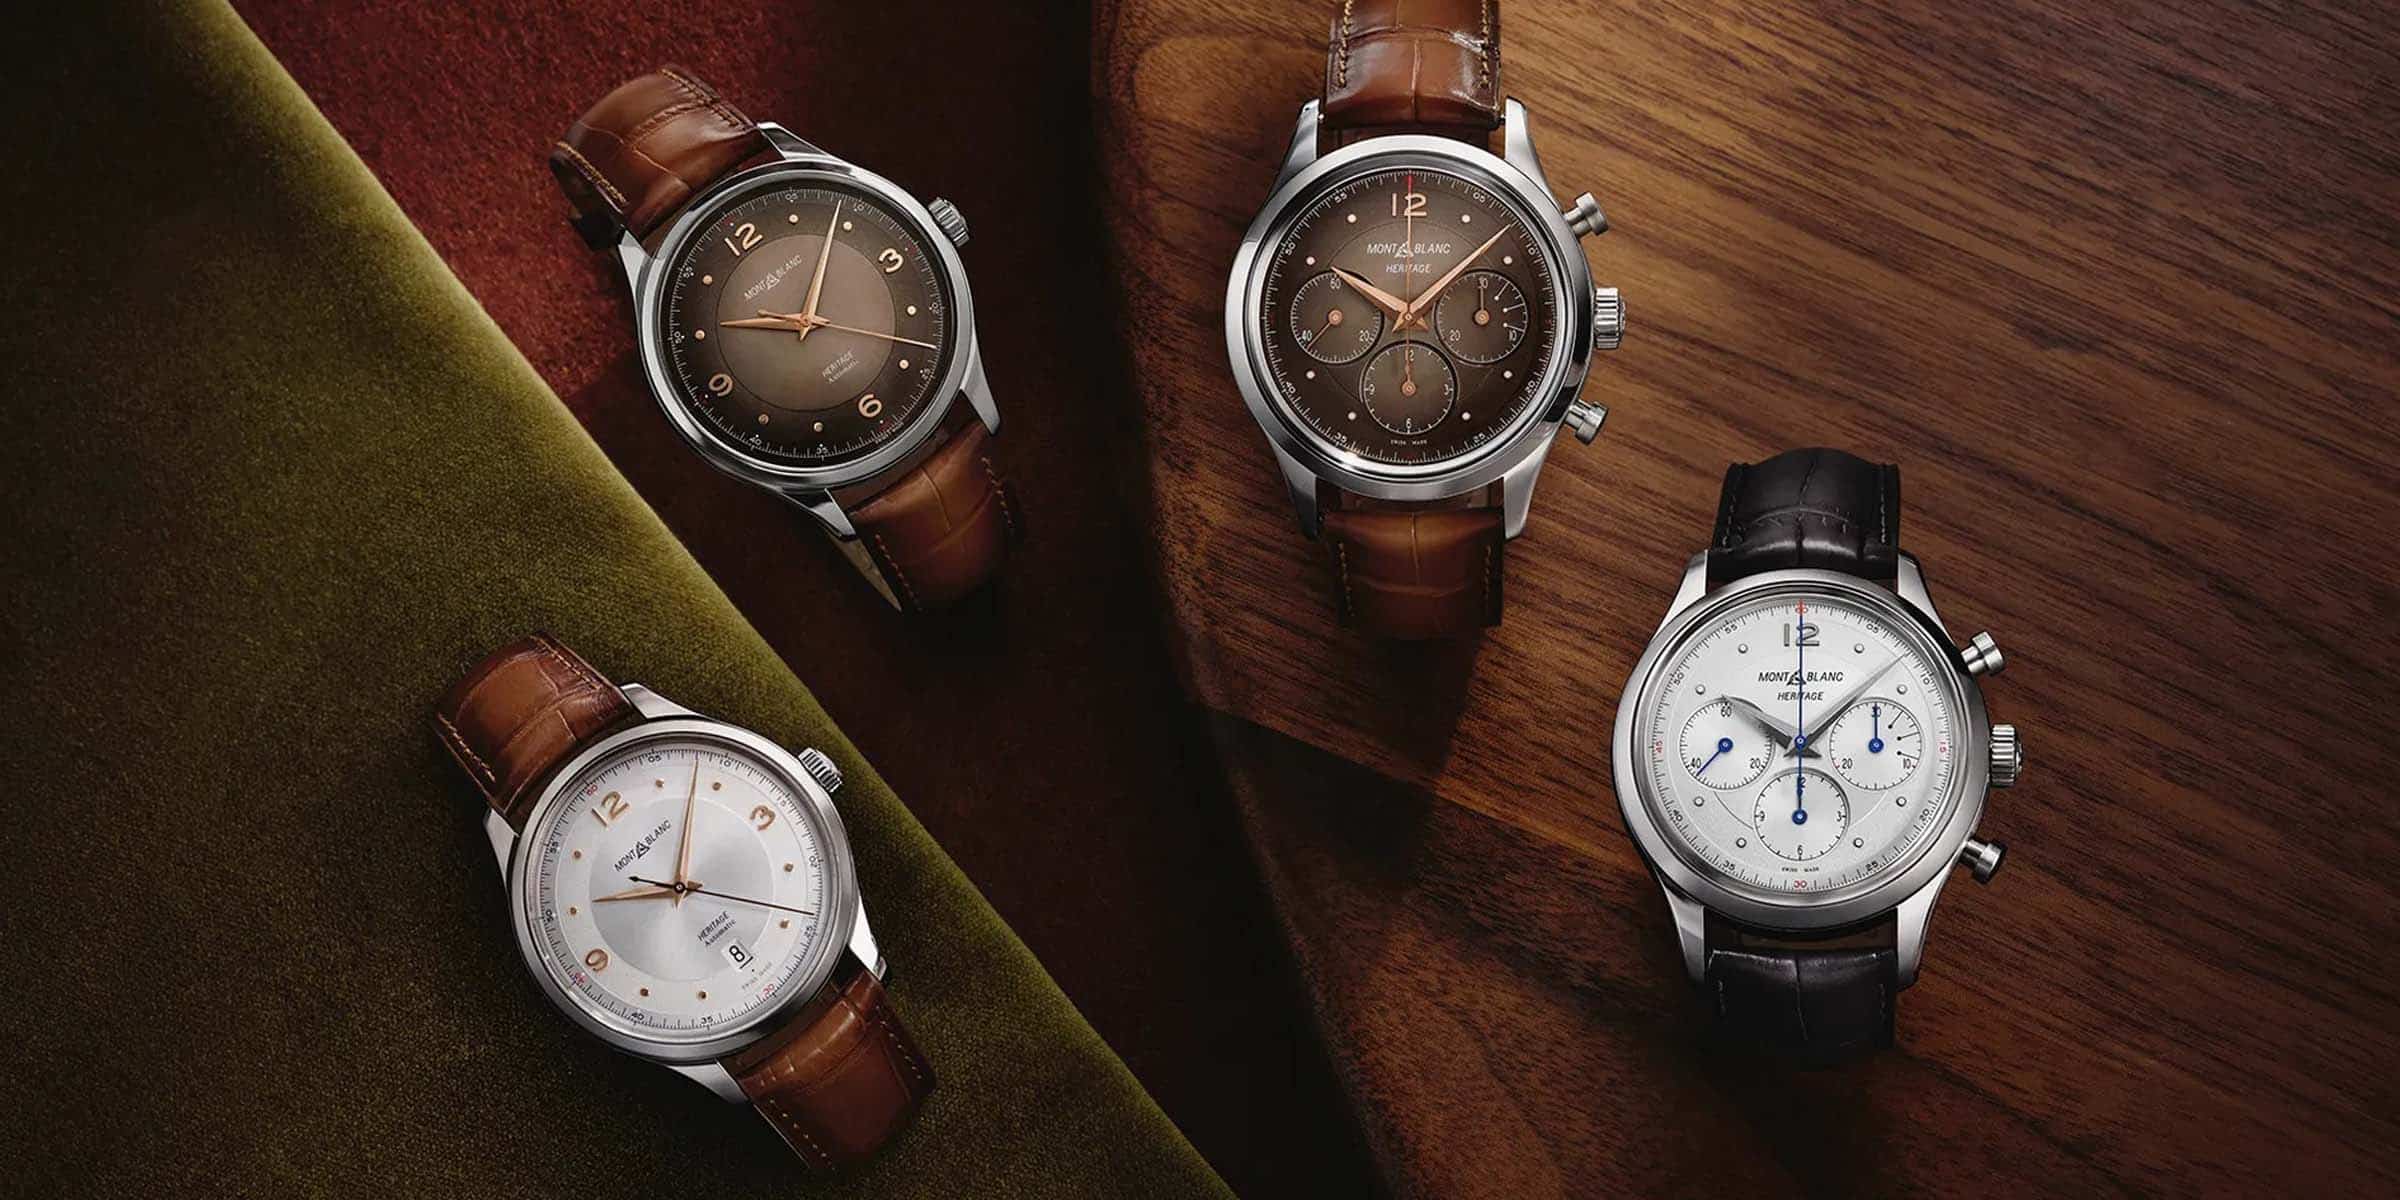 Montblanc Watches: The Complete Buying Guide